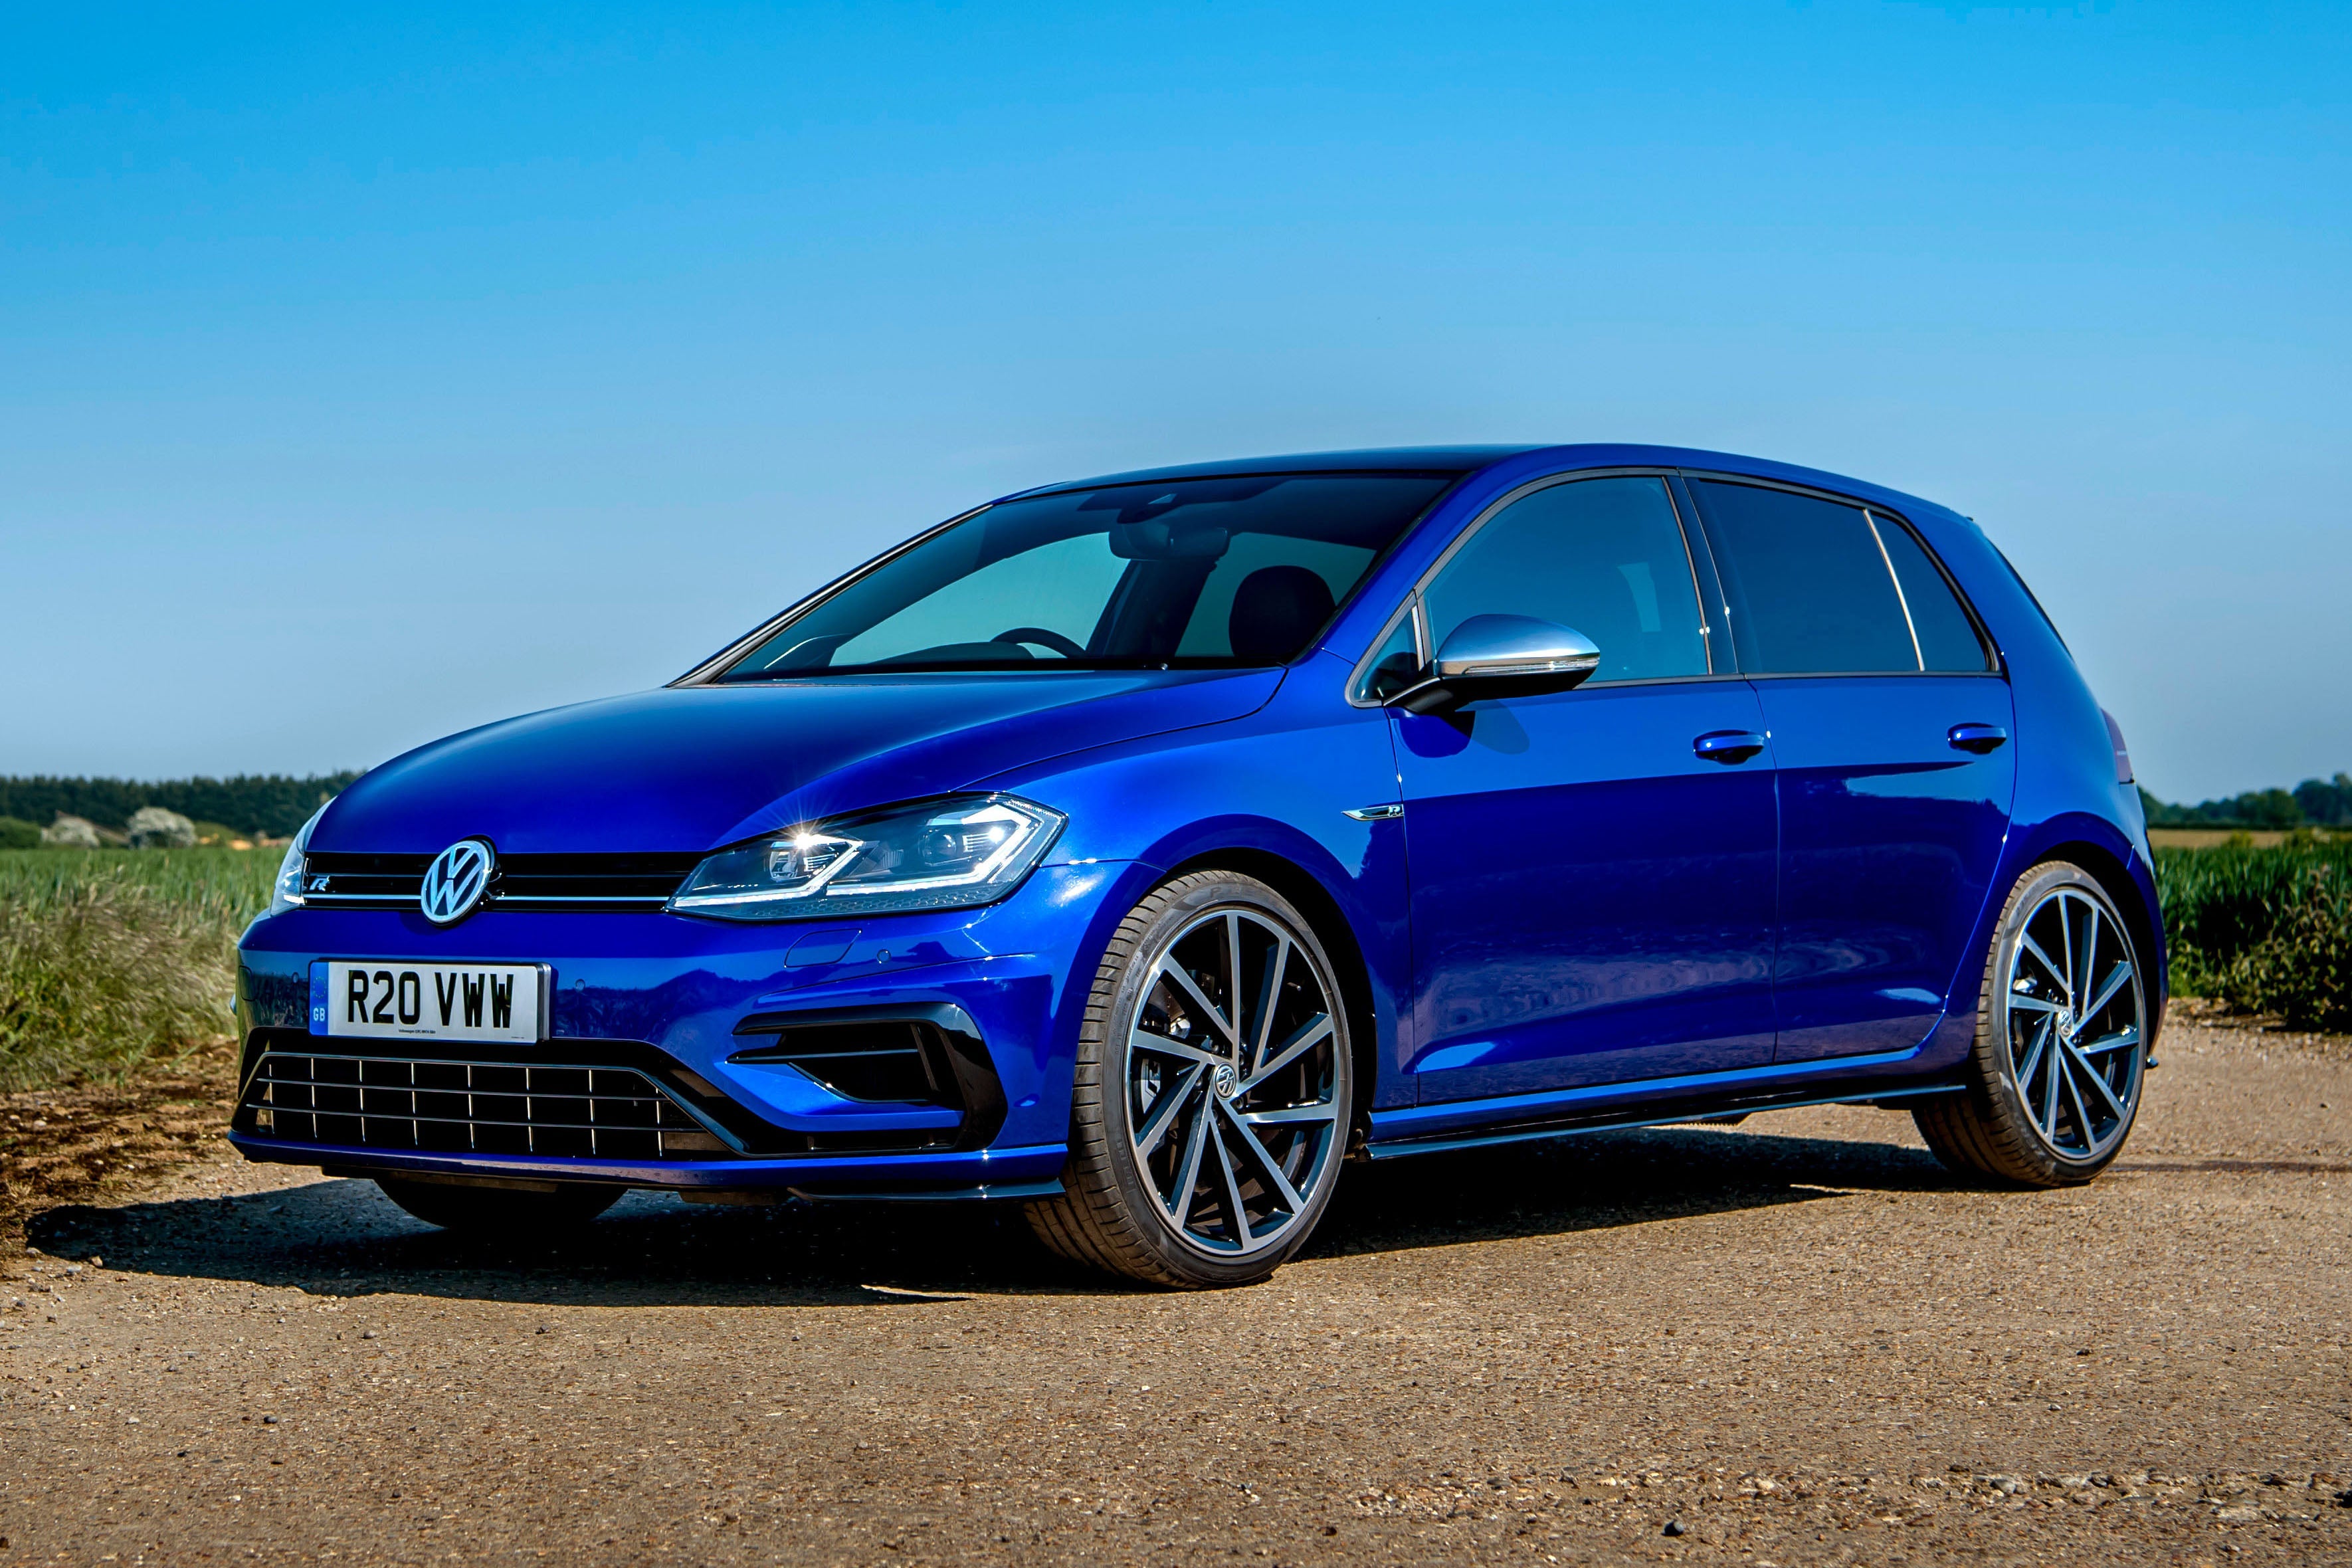 VW Says The New Golf R Will Be A 'Real Driving Machine